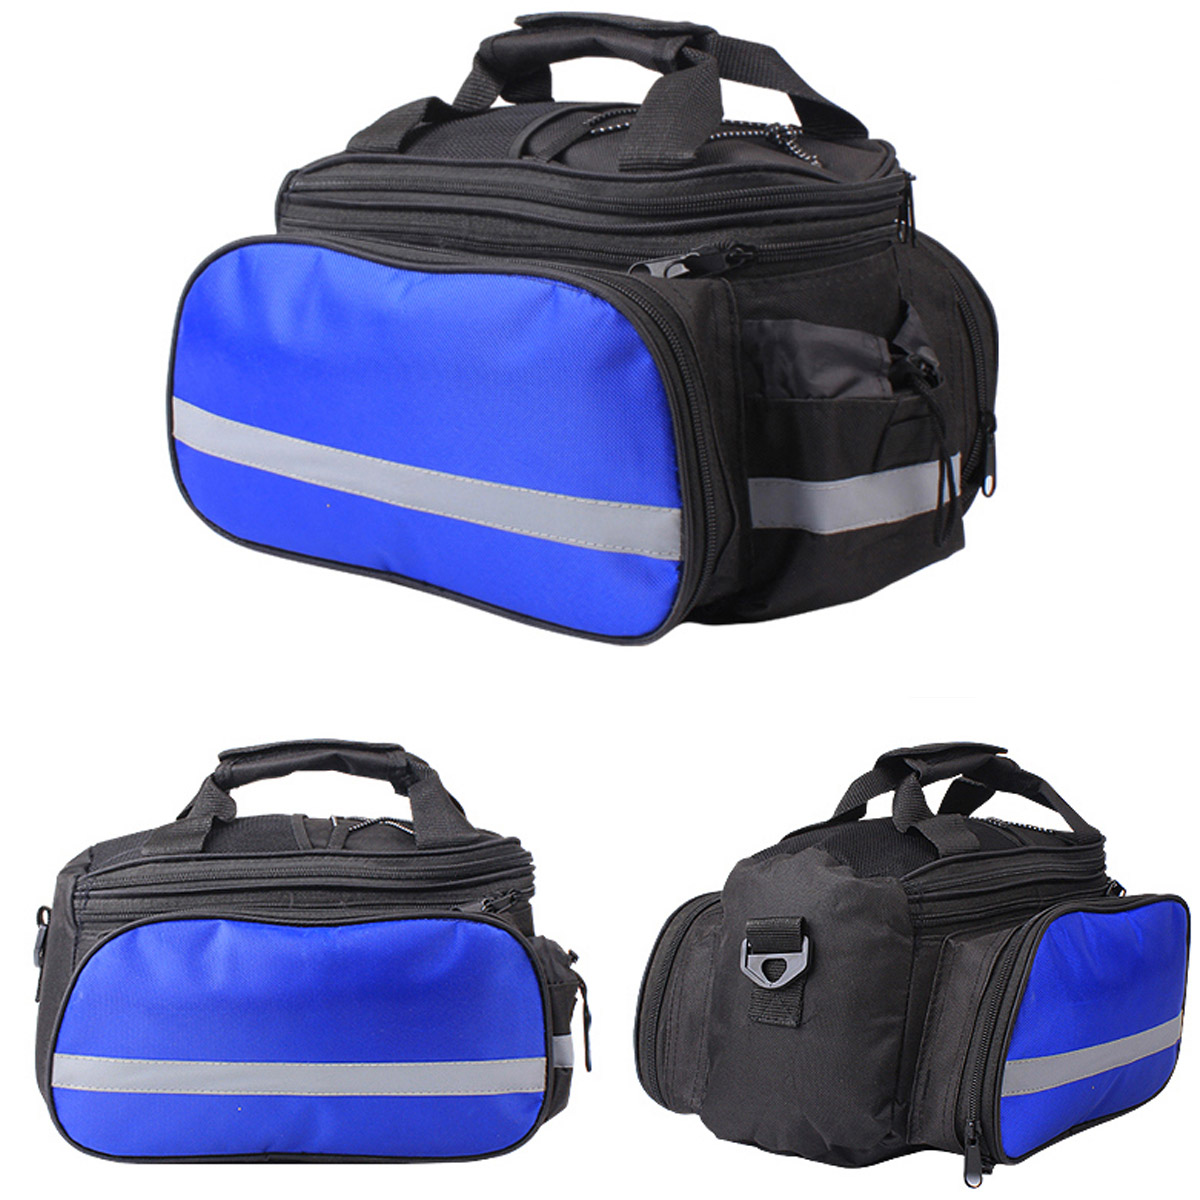 27L-Bicycle-Riding-Package-Large-Capacity-Waterproof-Reflective-Strips-Outdoor-Riding-Bag-1874551-14